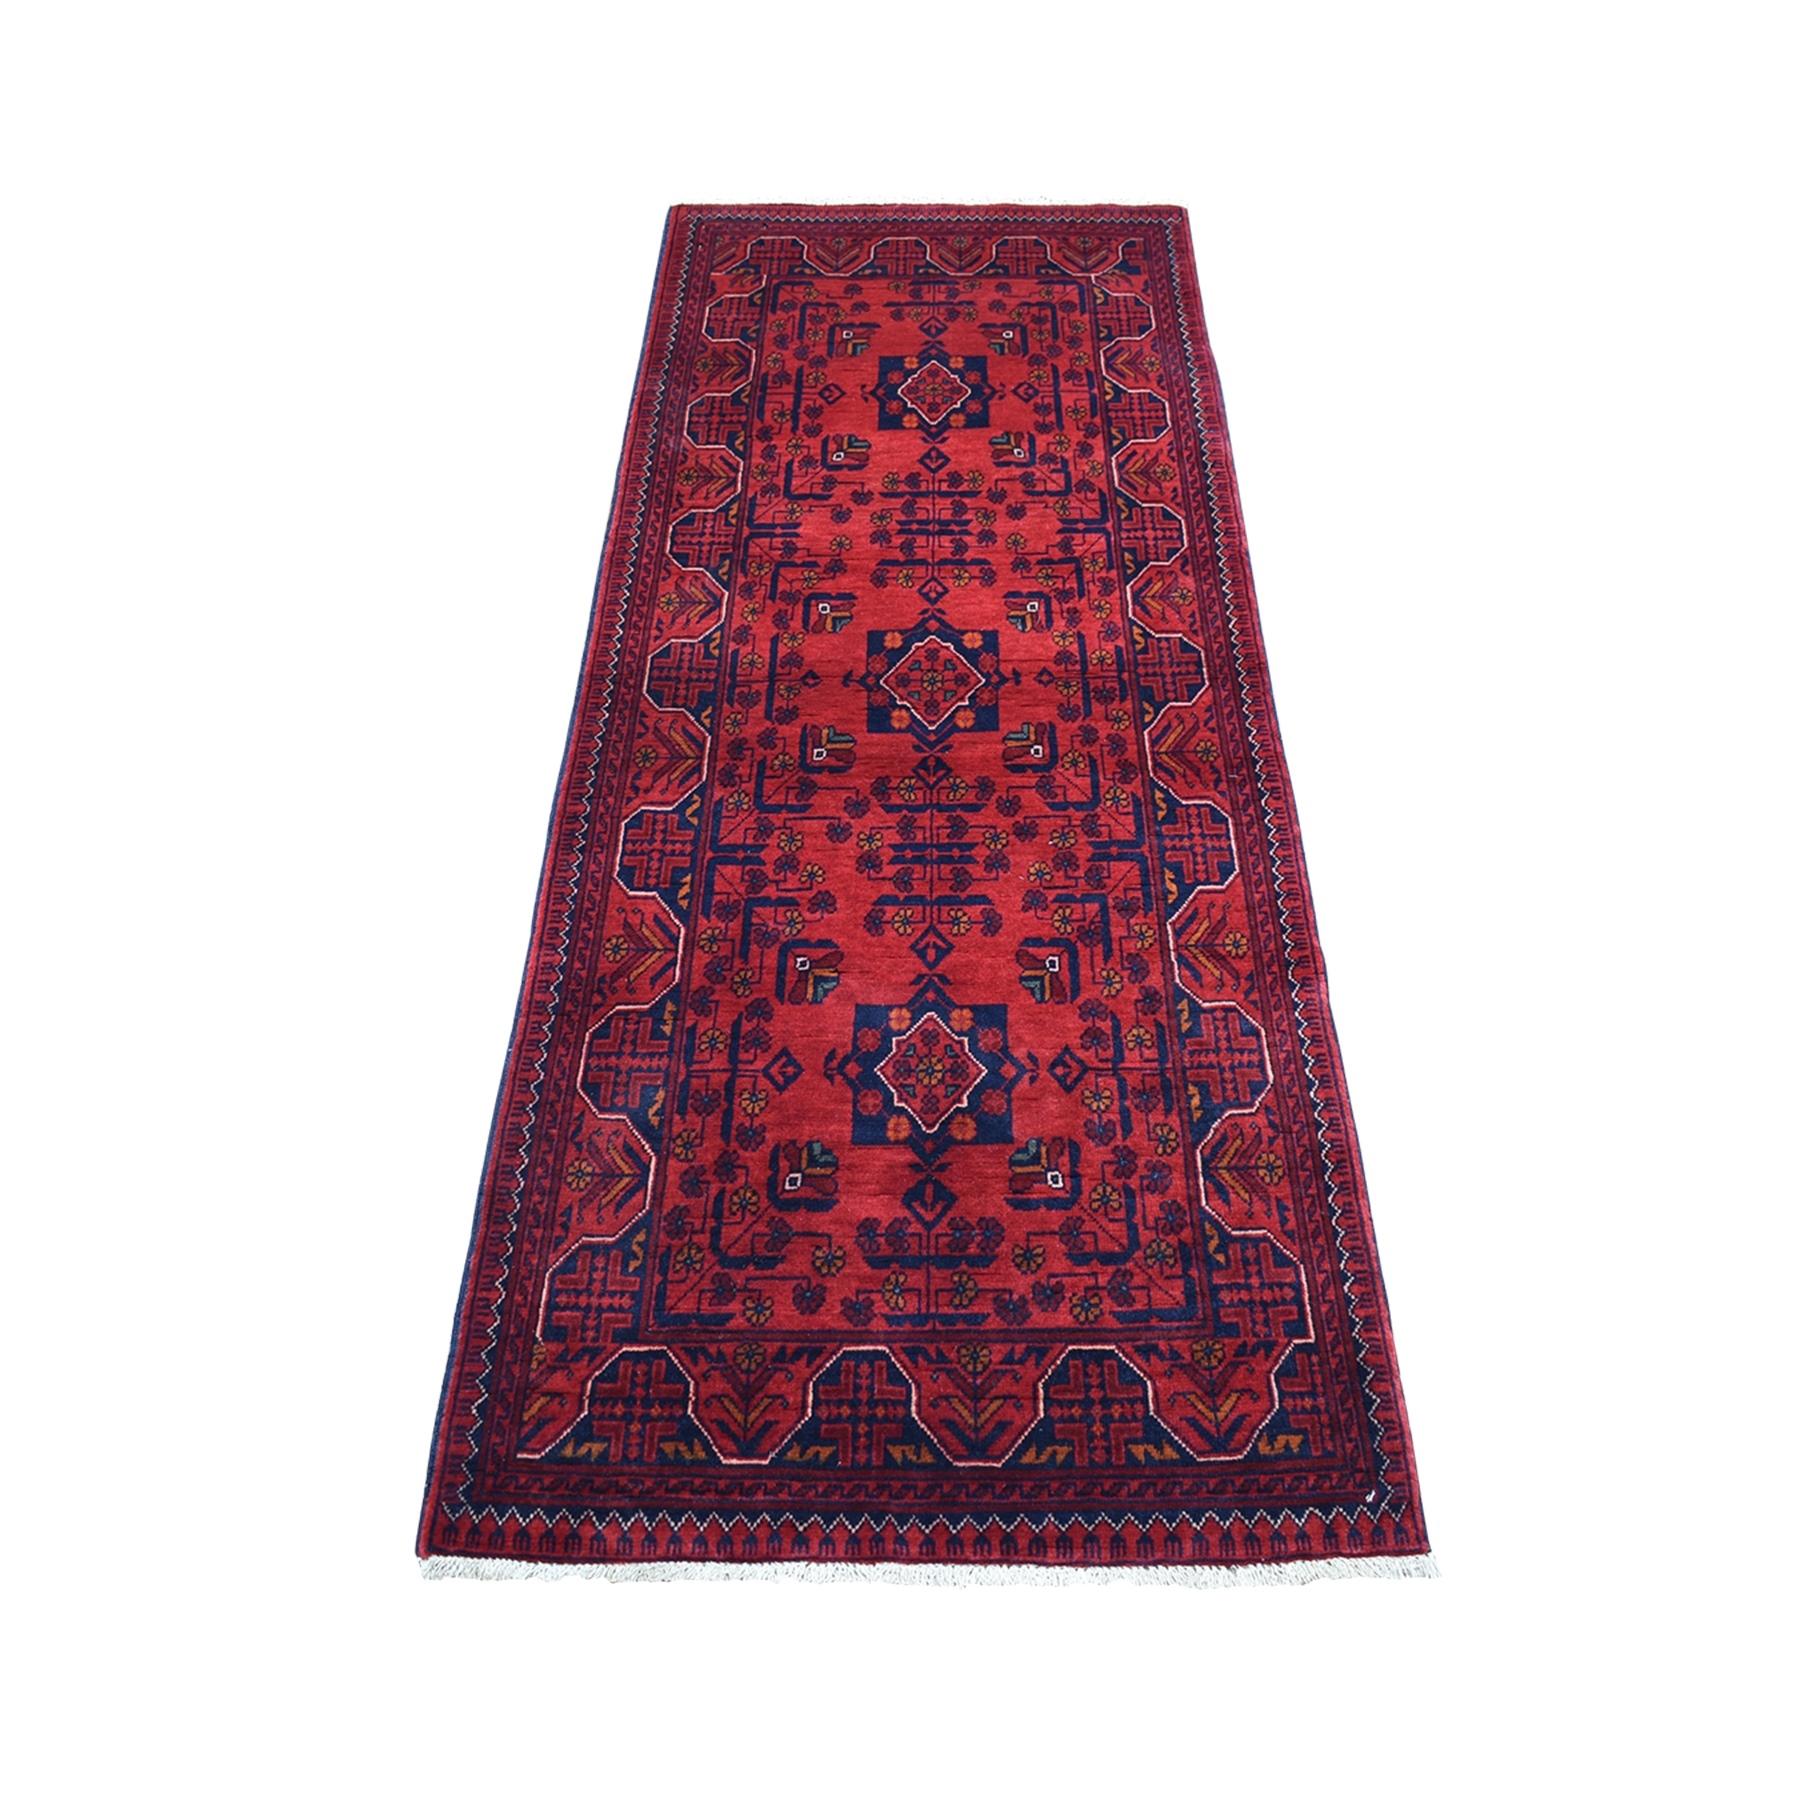 2'5"x6'3" Afghan Khamyab with Vegetable Dyes Extra Soft Wool Deep and Saturated Red Hand Woven Runner Oriental Rug 